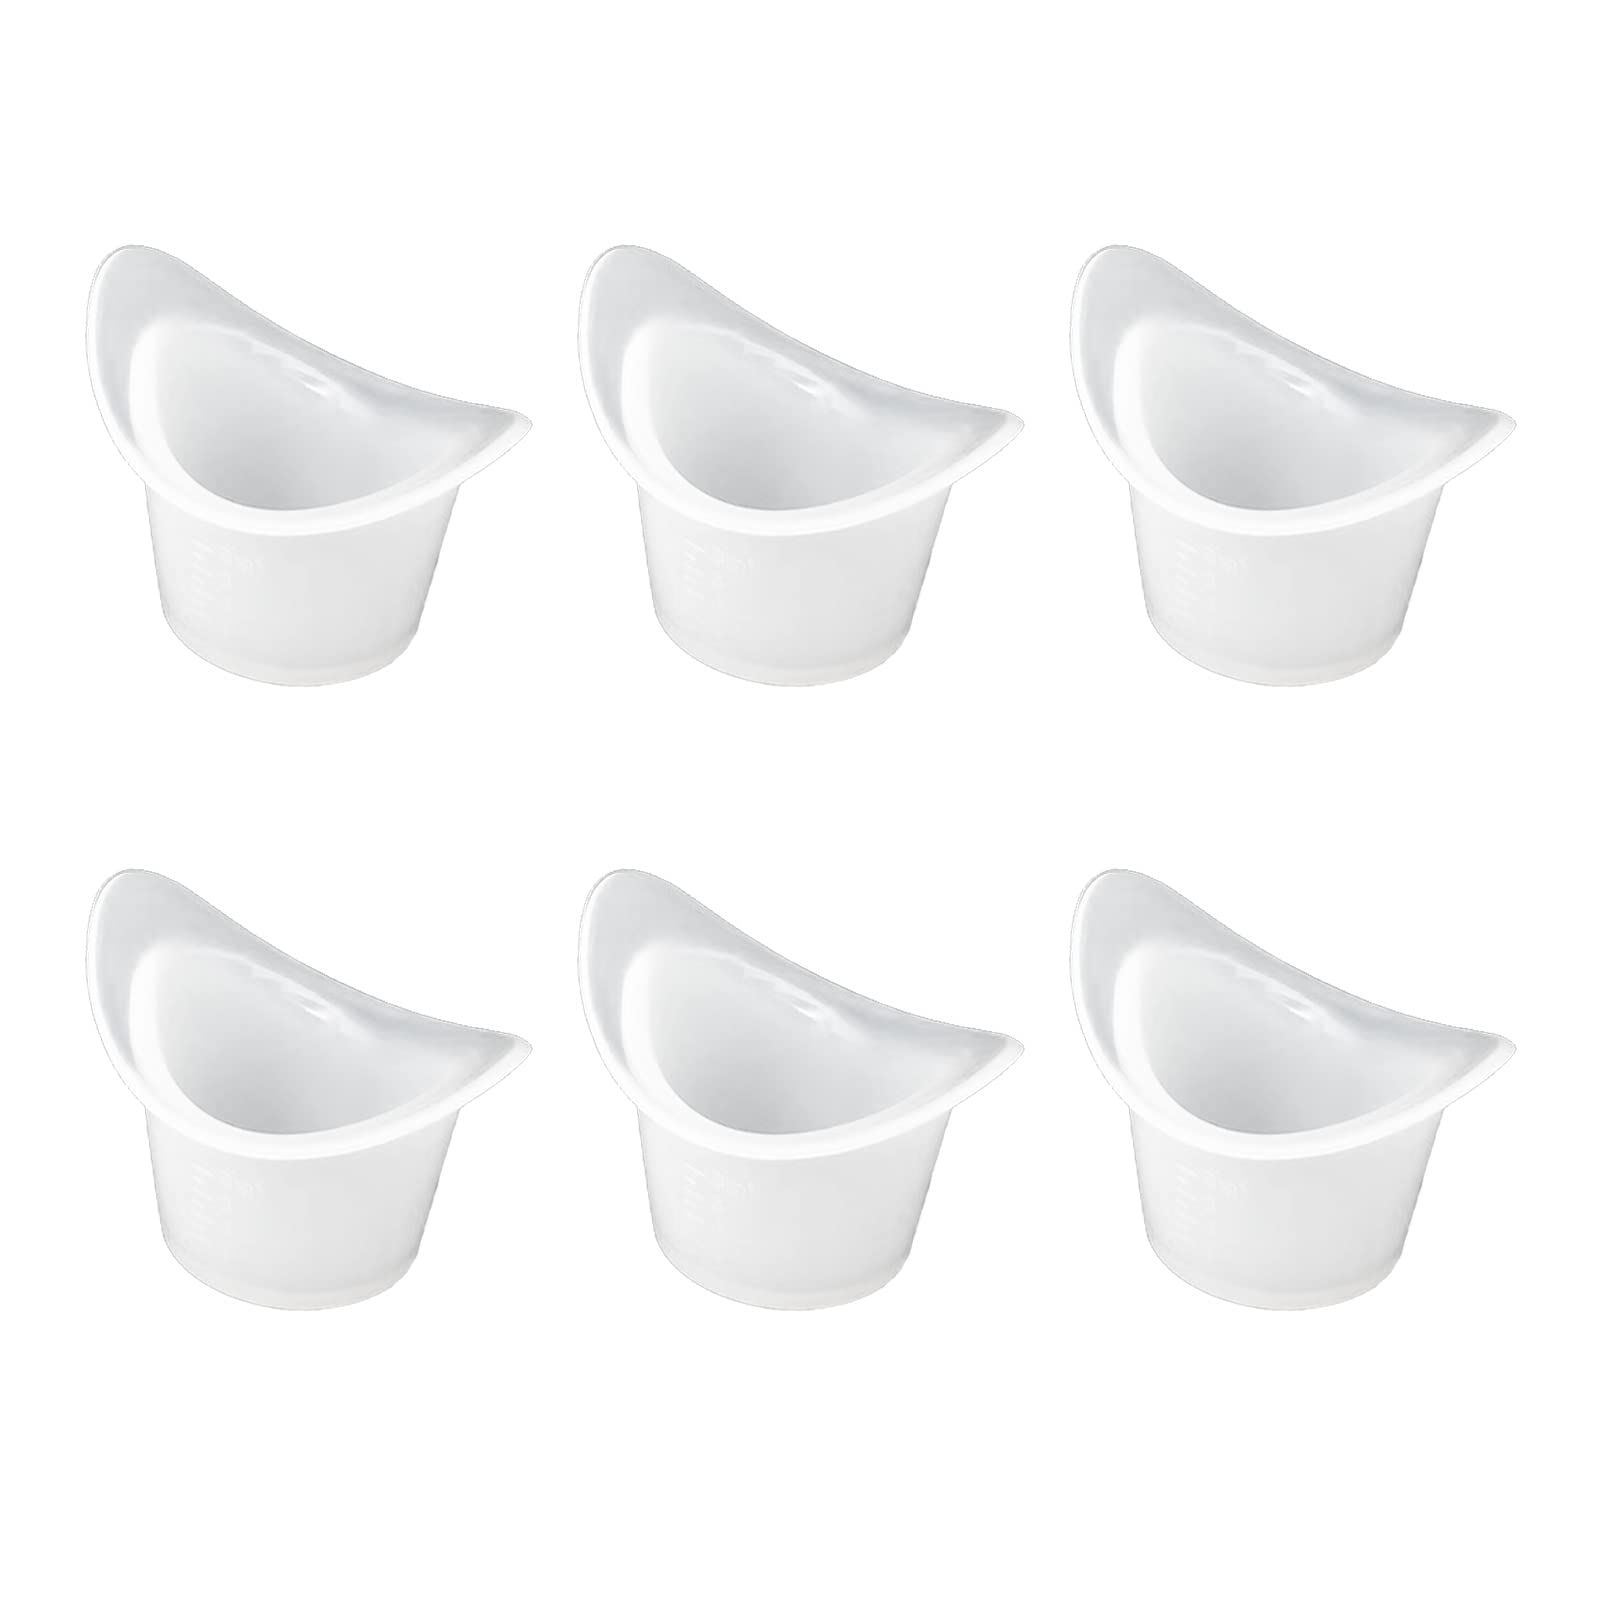 6 Pcs Silicone Eye Wash Cups Resuable Non Sterile Eye Bath Cups Eye Flush Cups for Refreshing Cleaning Tired Eyes, Black, DSAD